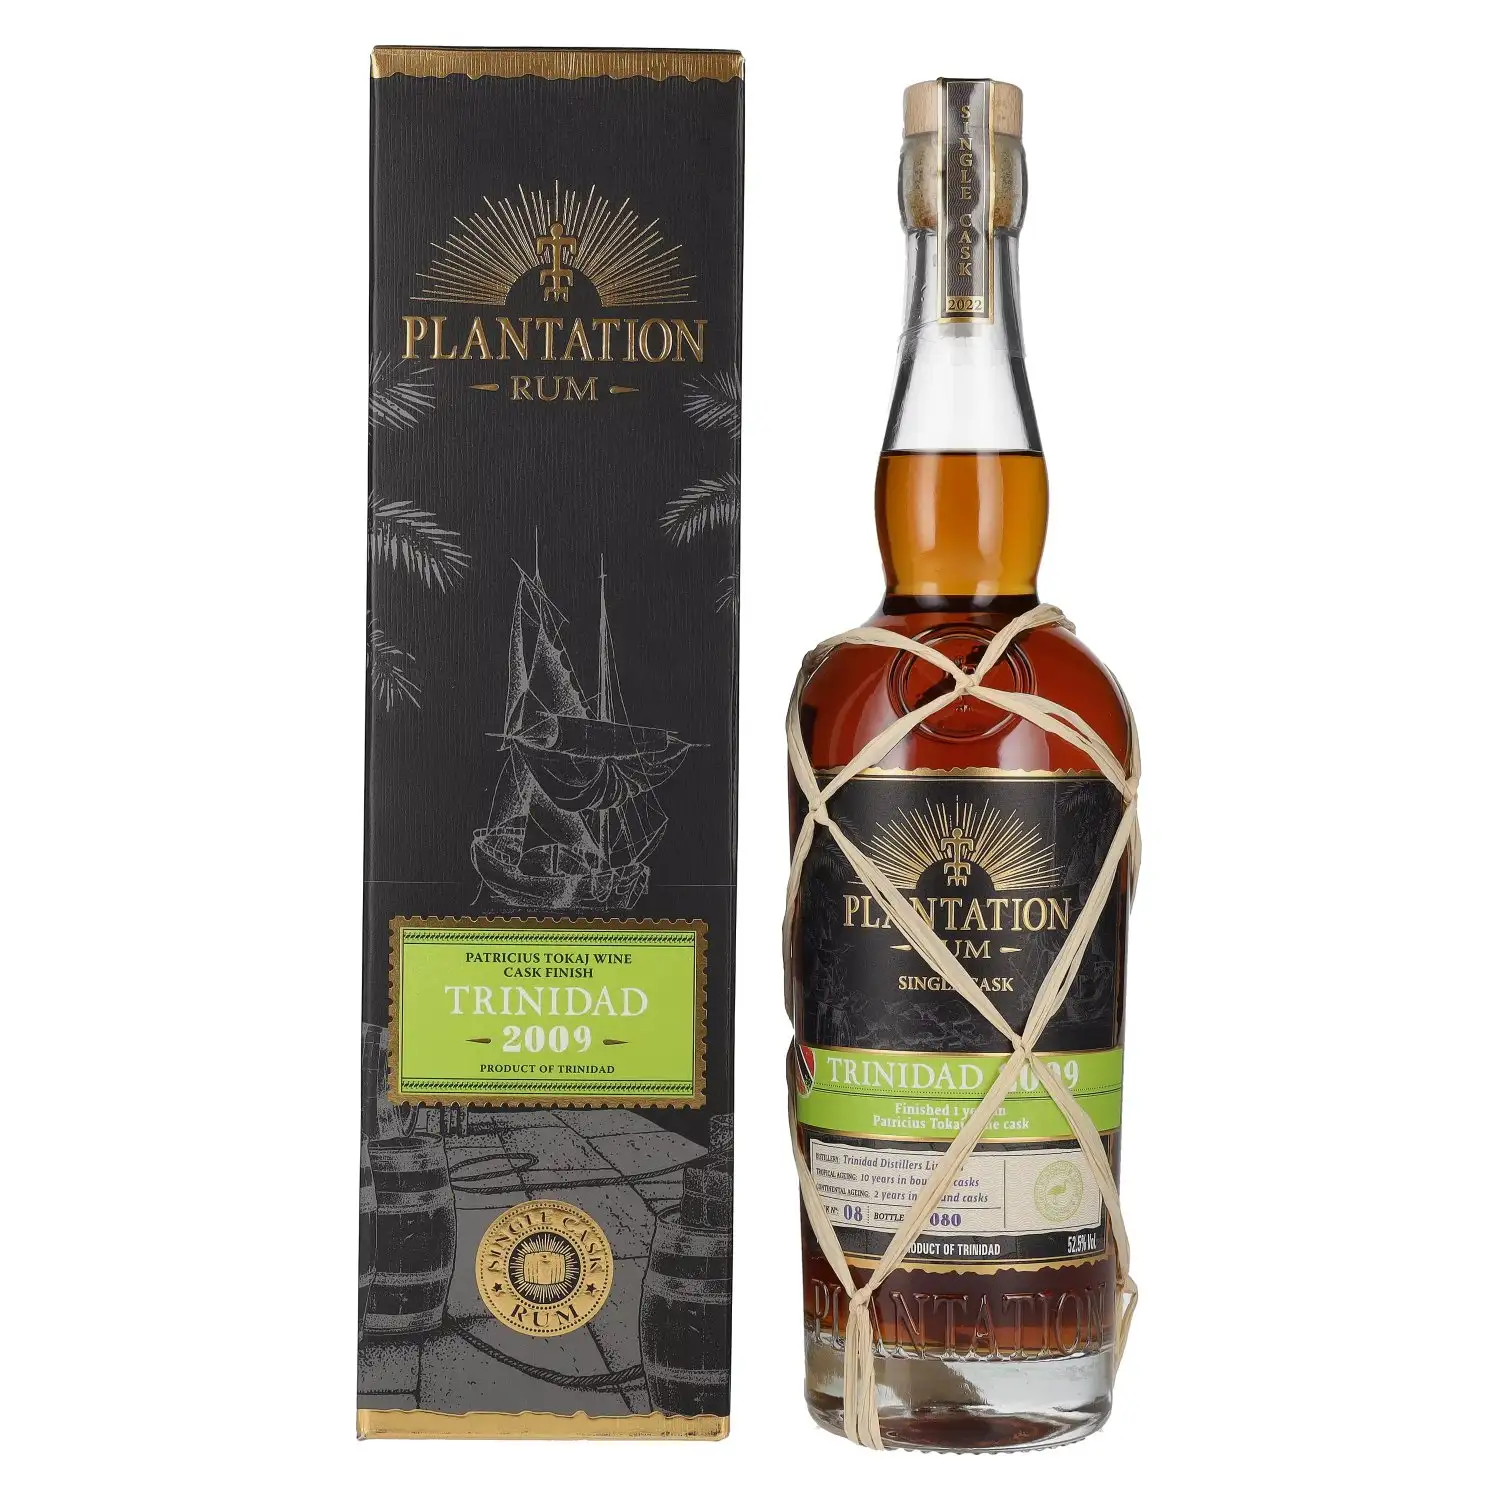 Image of the front of the bottle of the rum Plantation Trinidad Tokaj Finish (Sélection Exclusive-Fut)